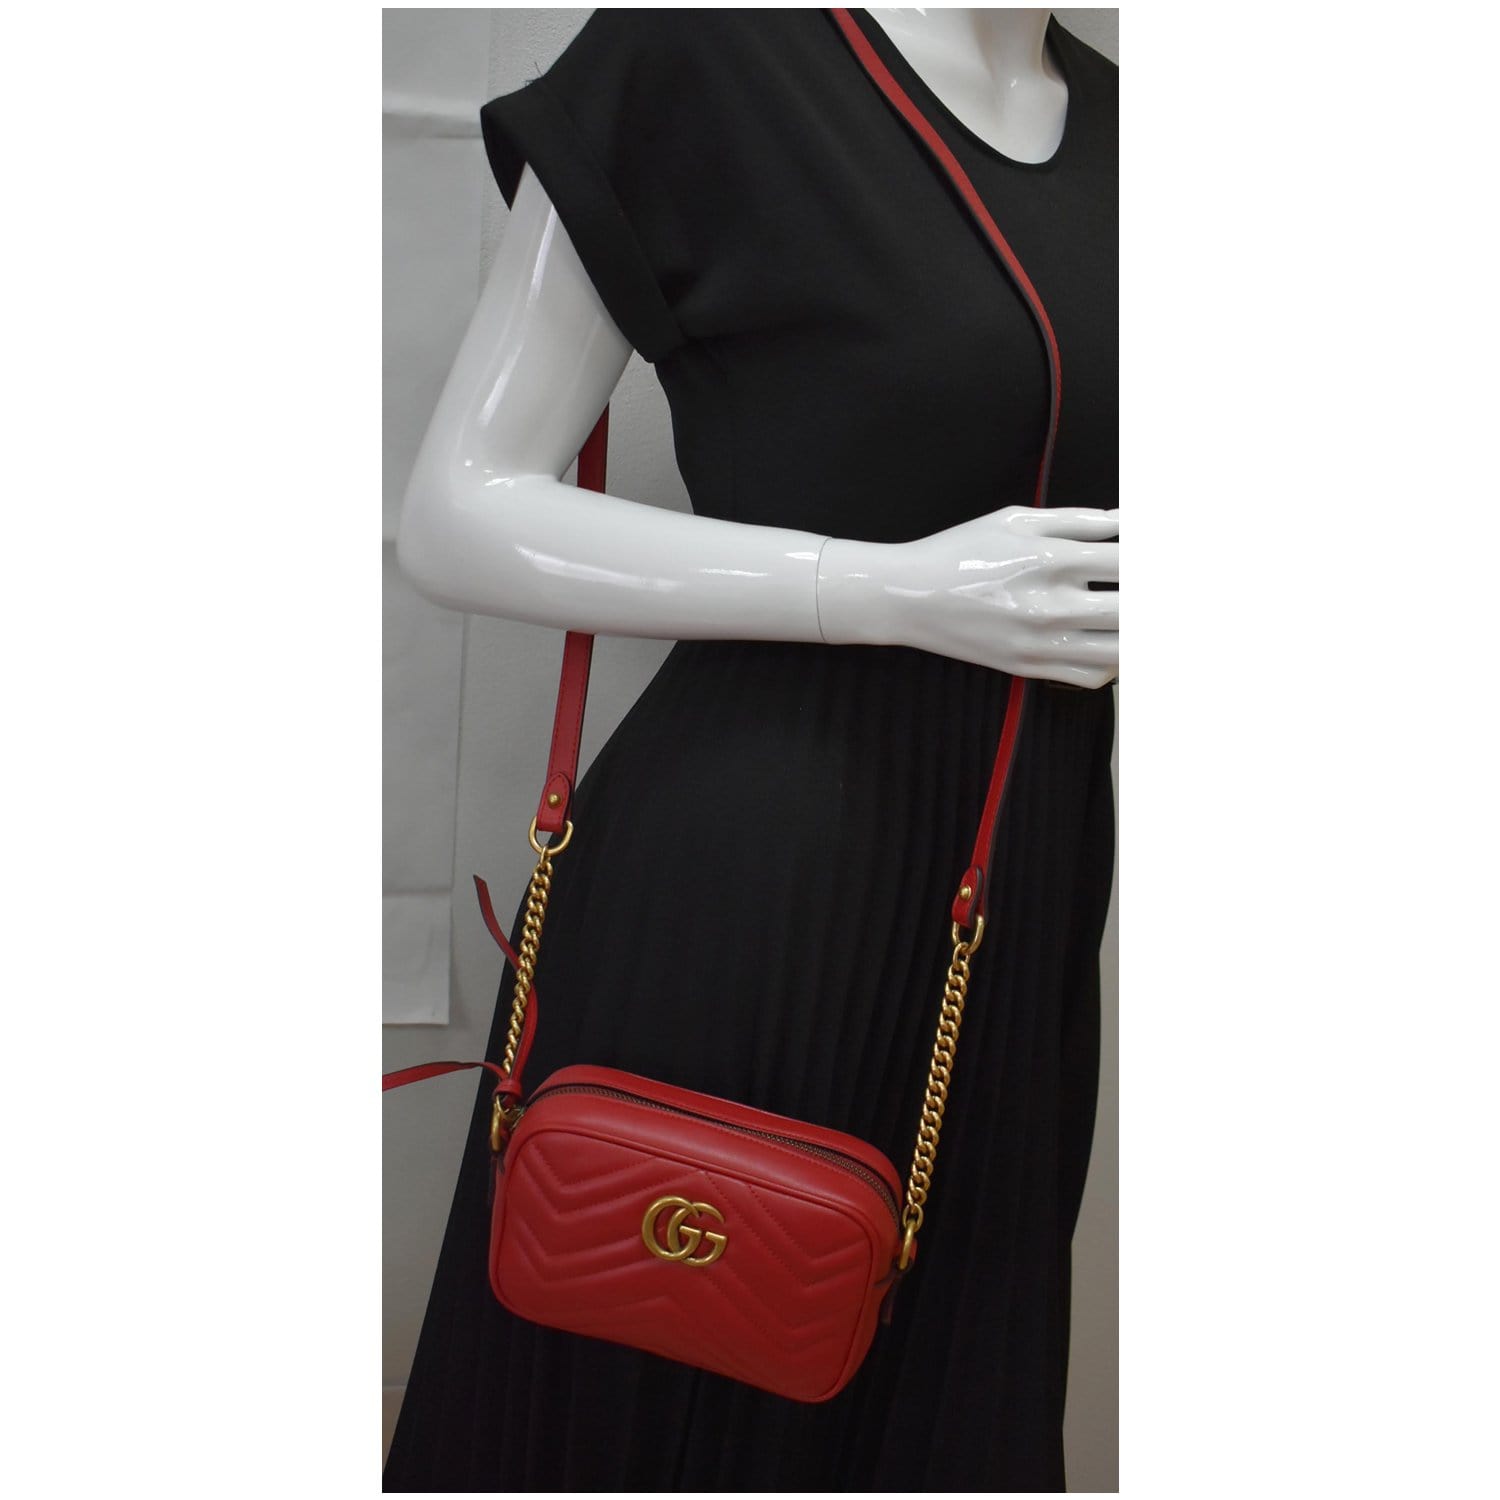 GUCCI Small GG Marmont red bag